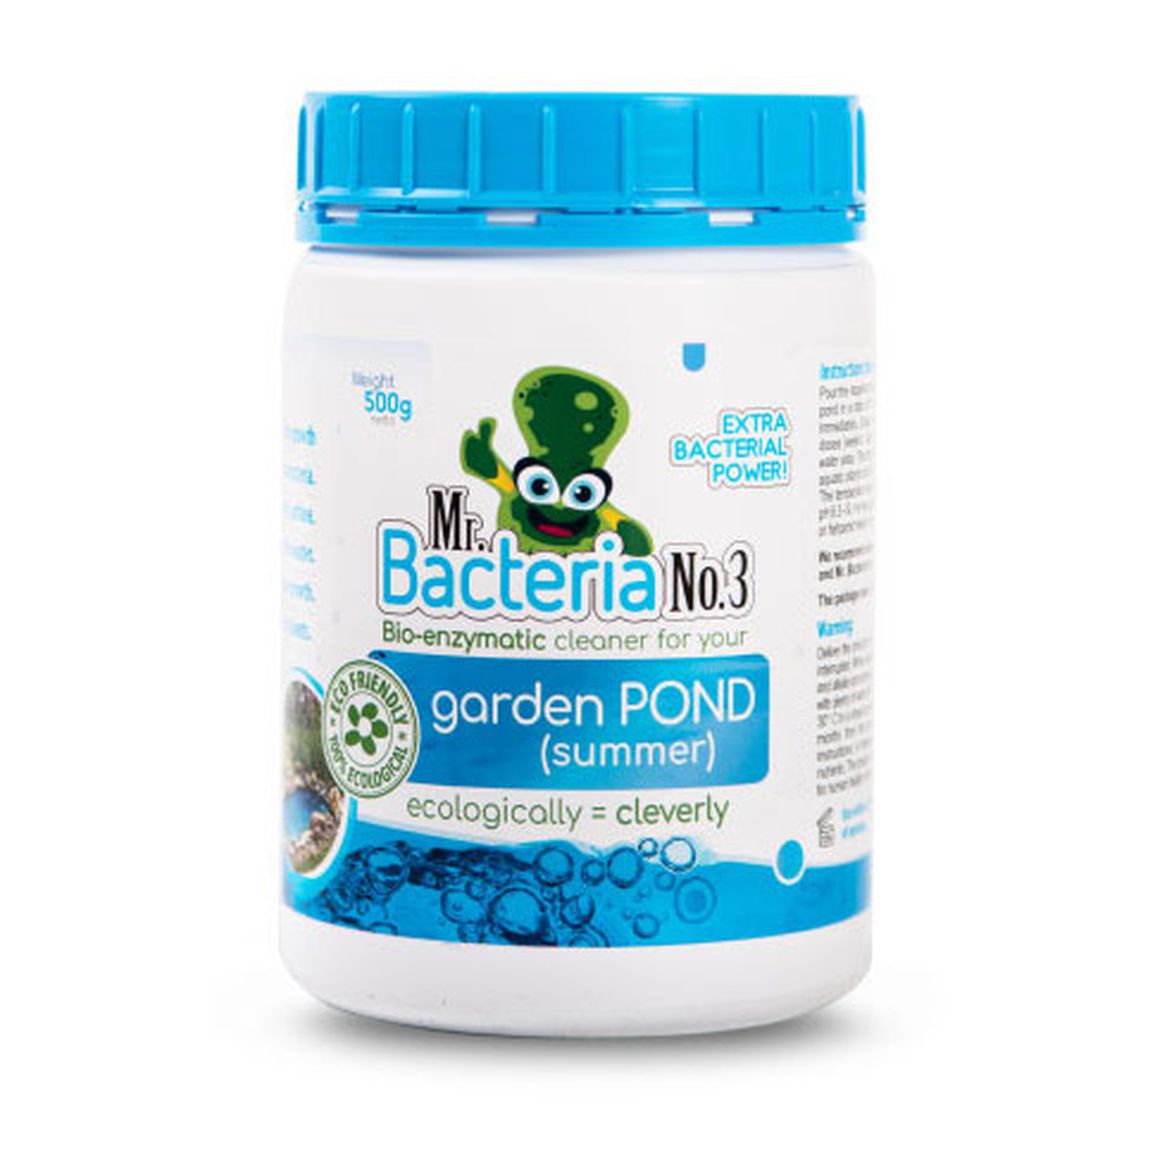 Bio-enzymatic cleaner additives for your Garden Pond during summer - 500g